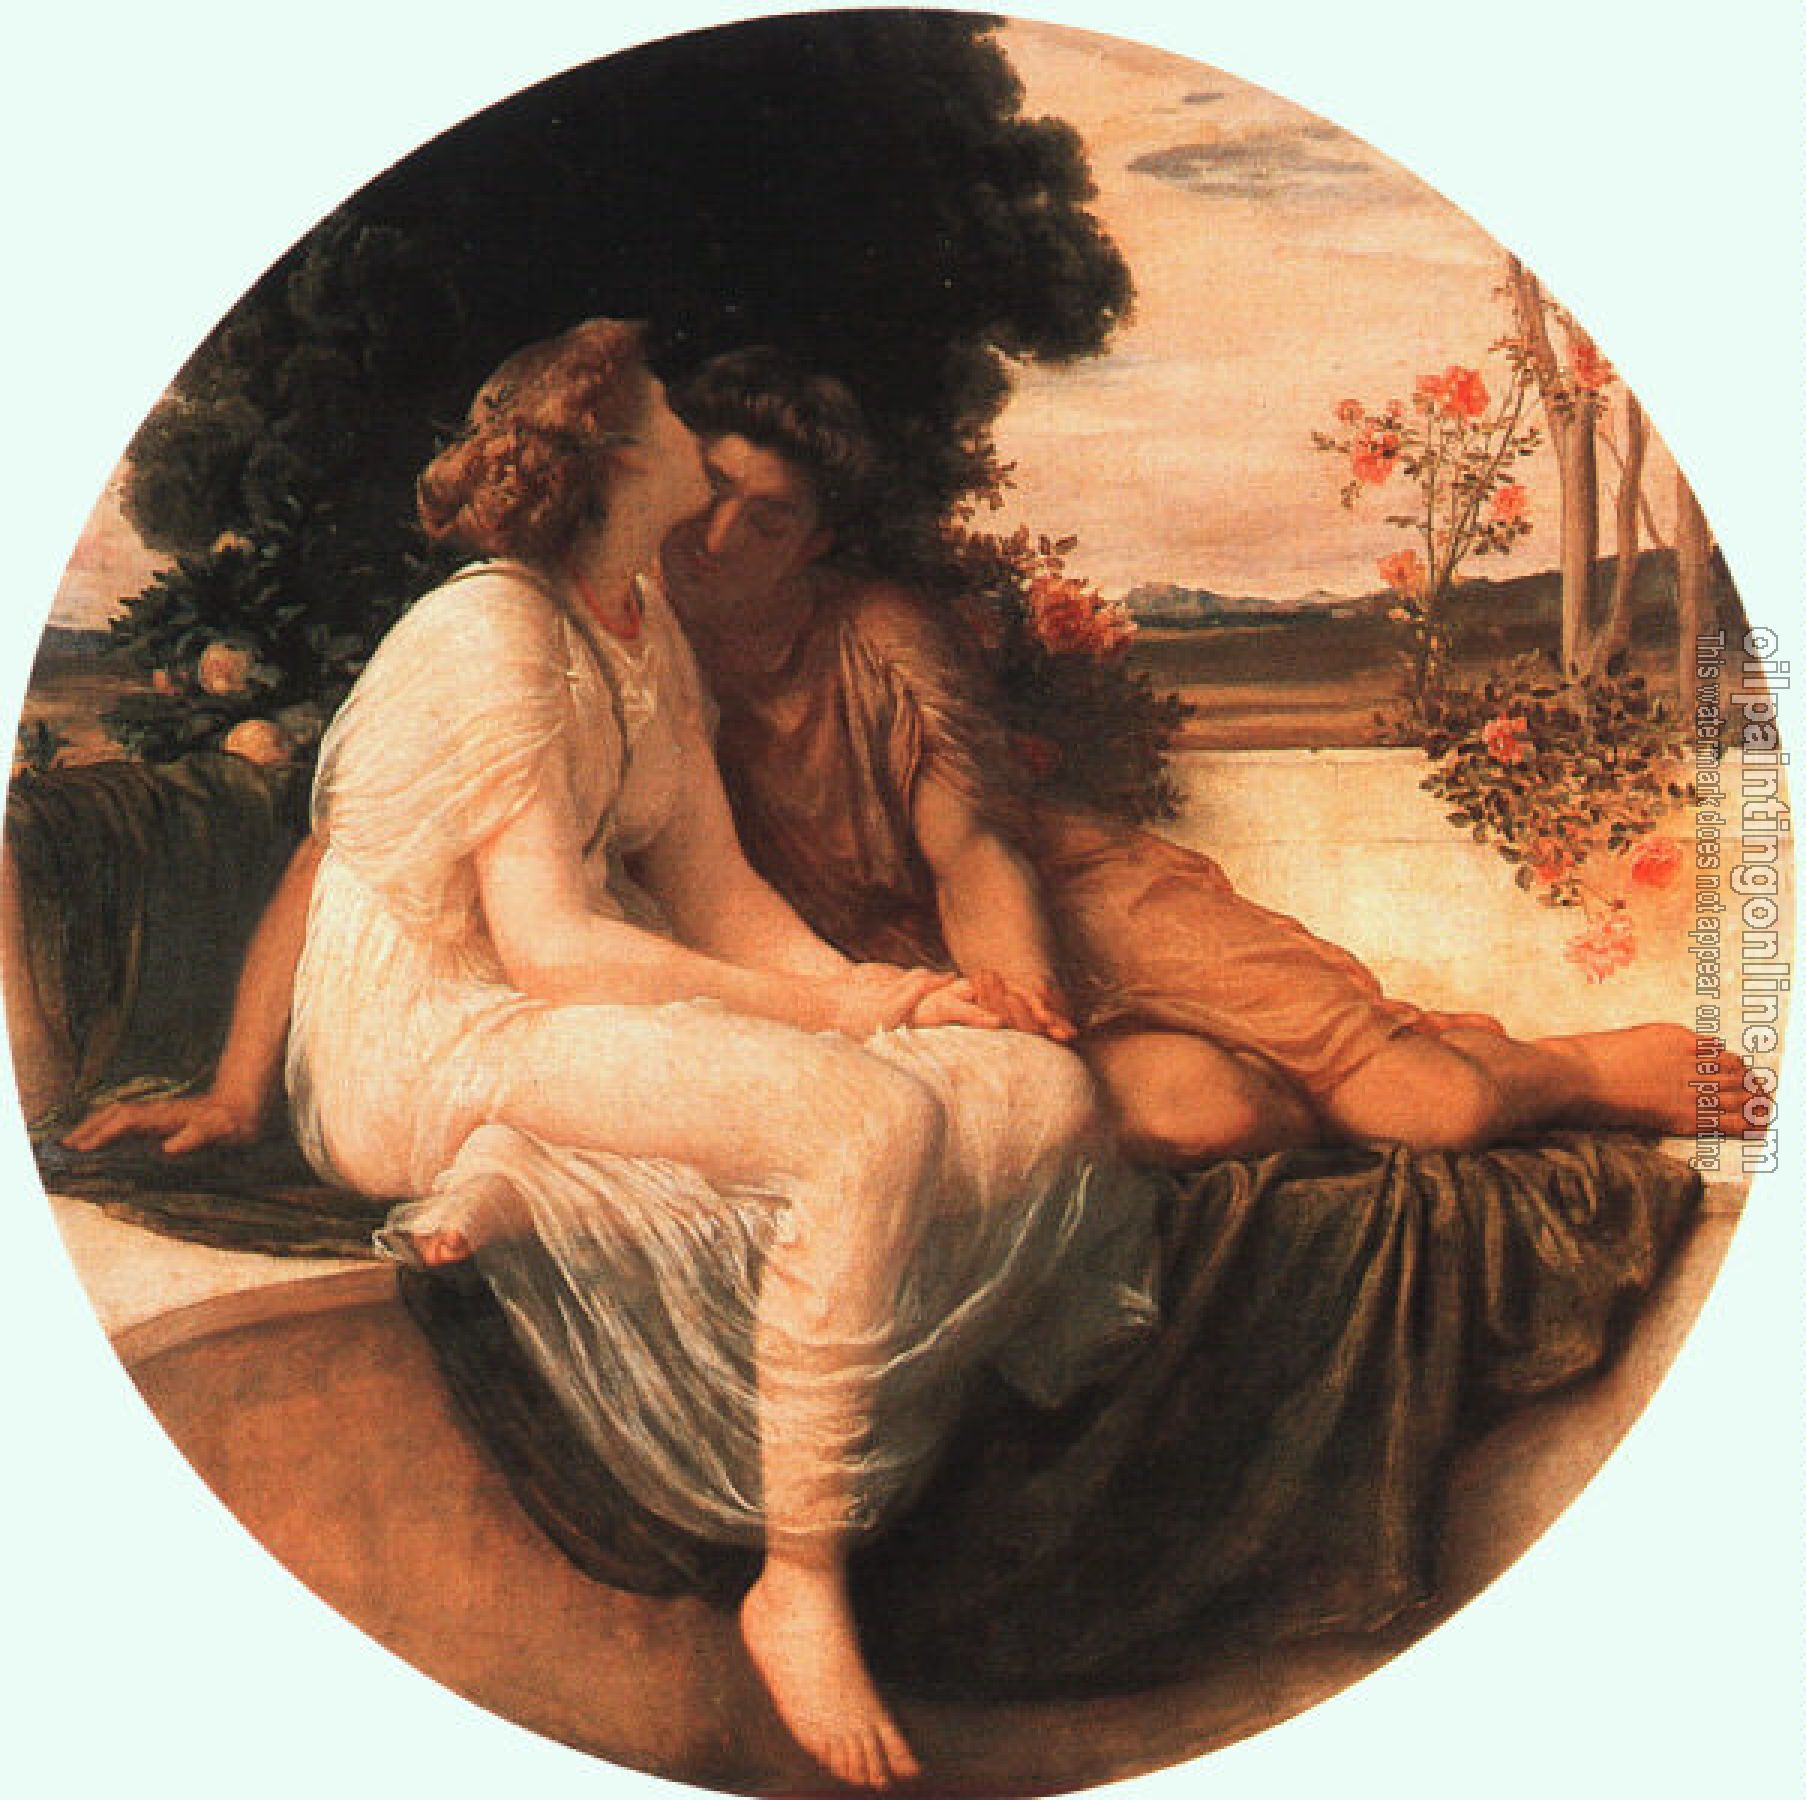 Leighton, Lord Frederick - Acme and Septimus